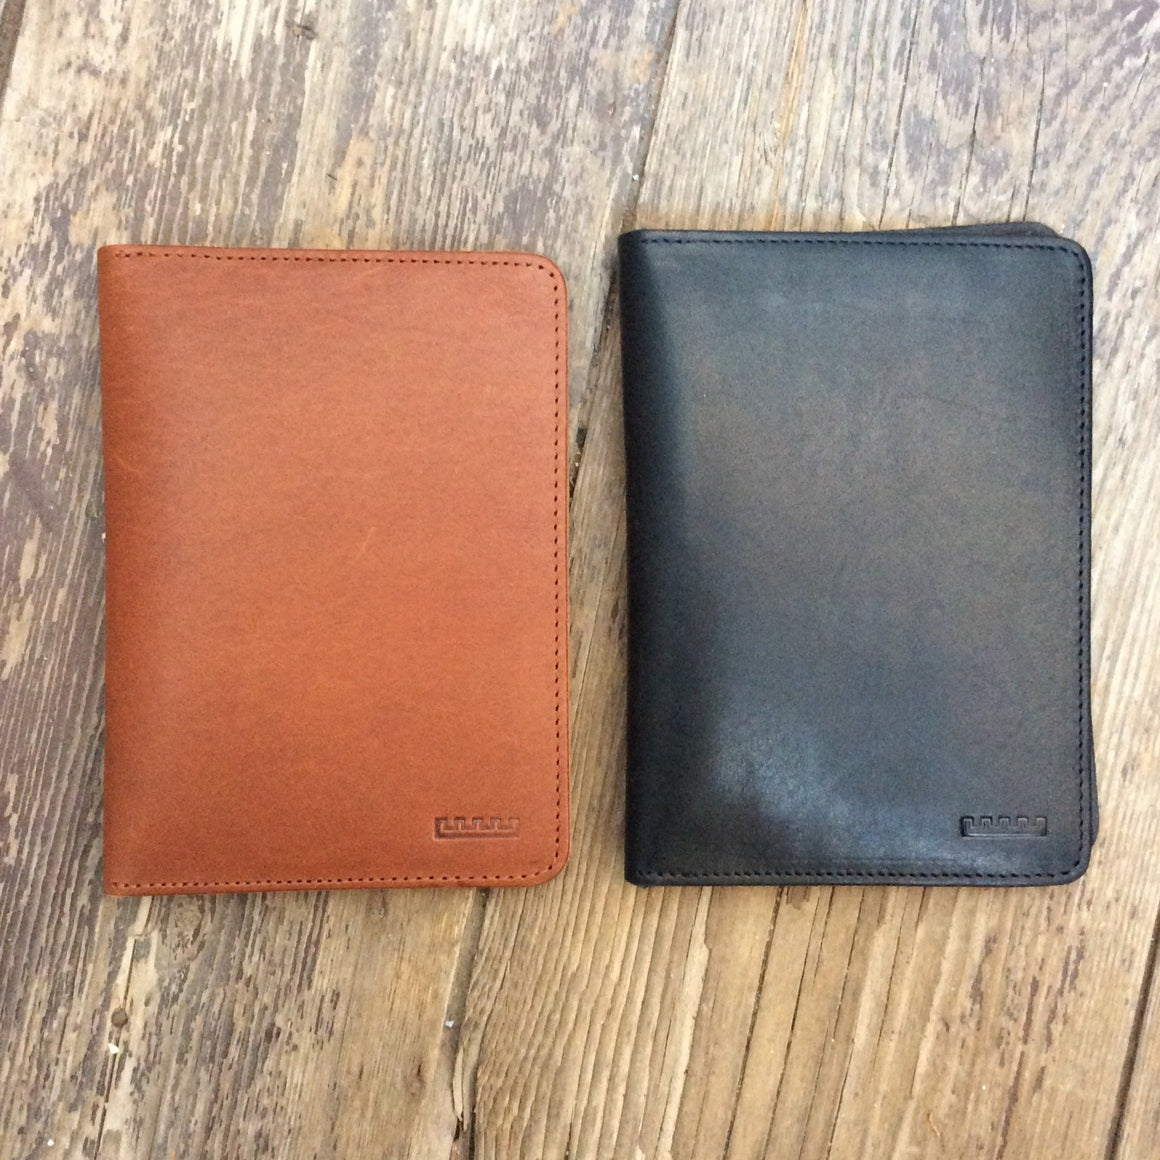 All the Kings Men Leather Passport Wallets